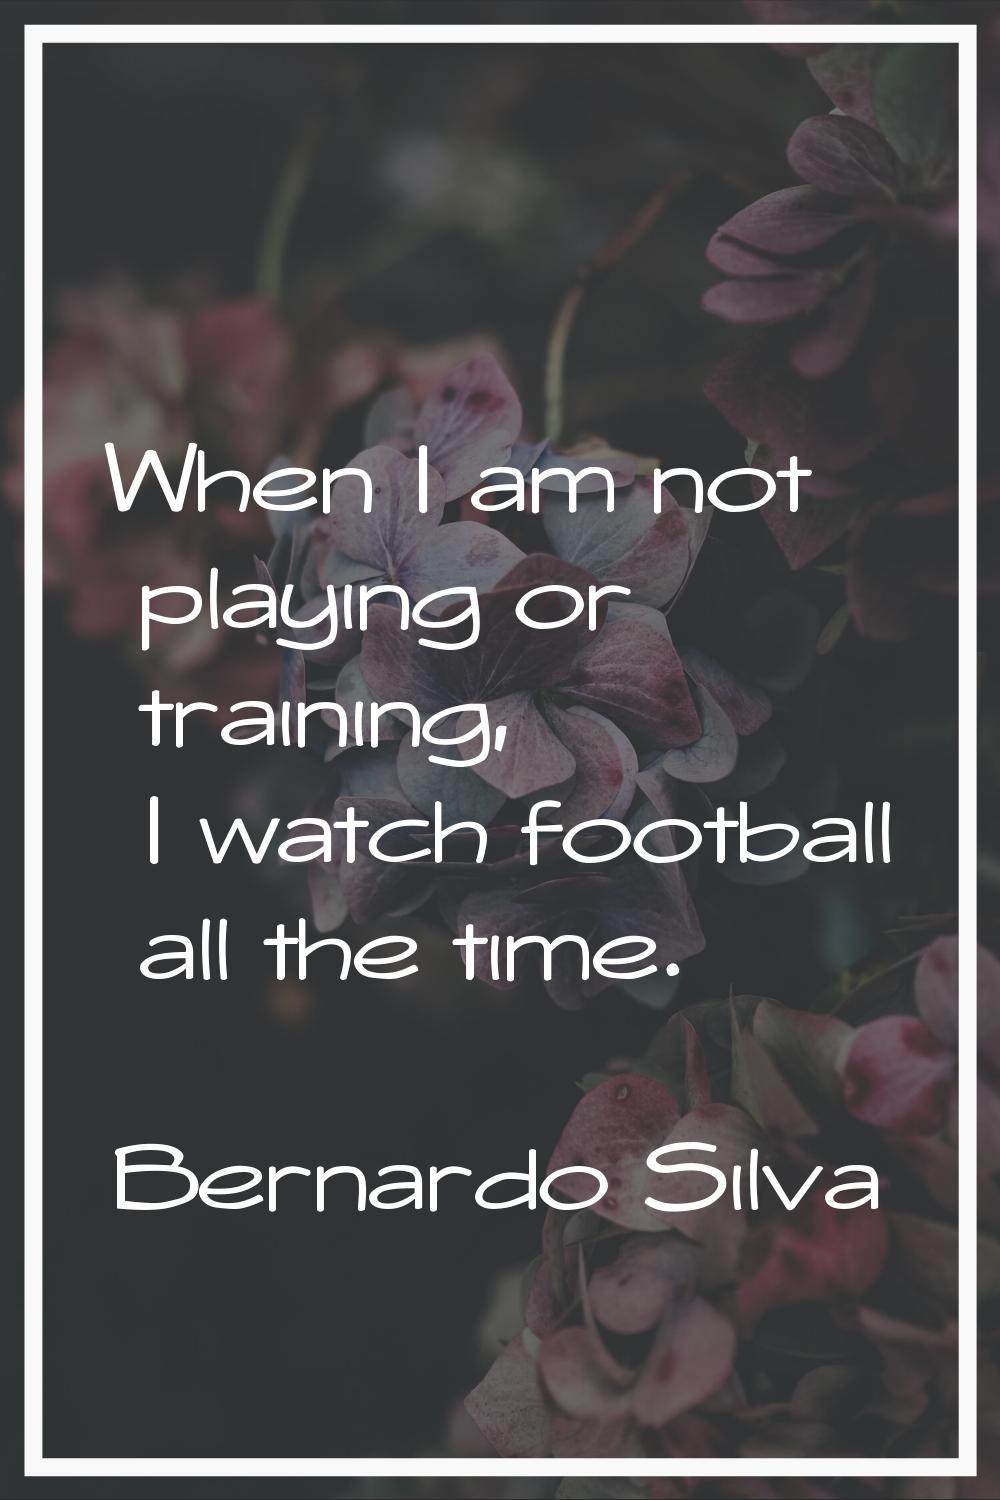 When I am not playing or training, I watch football all the time.